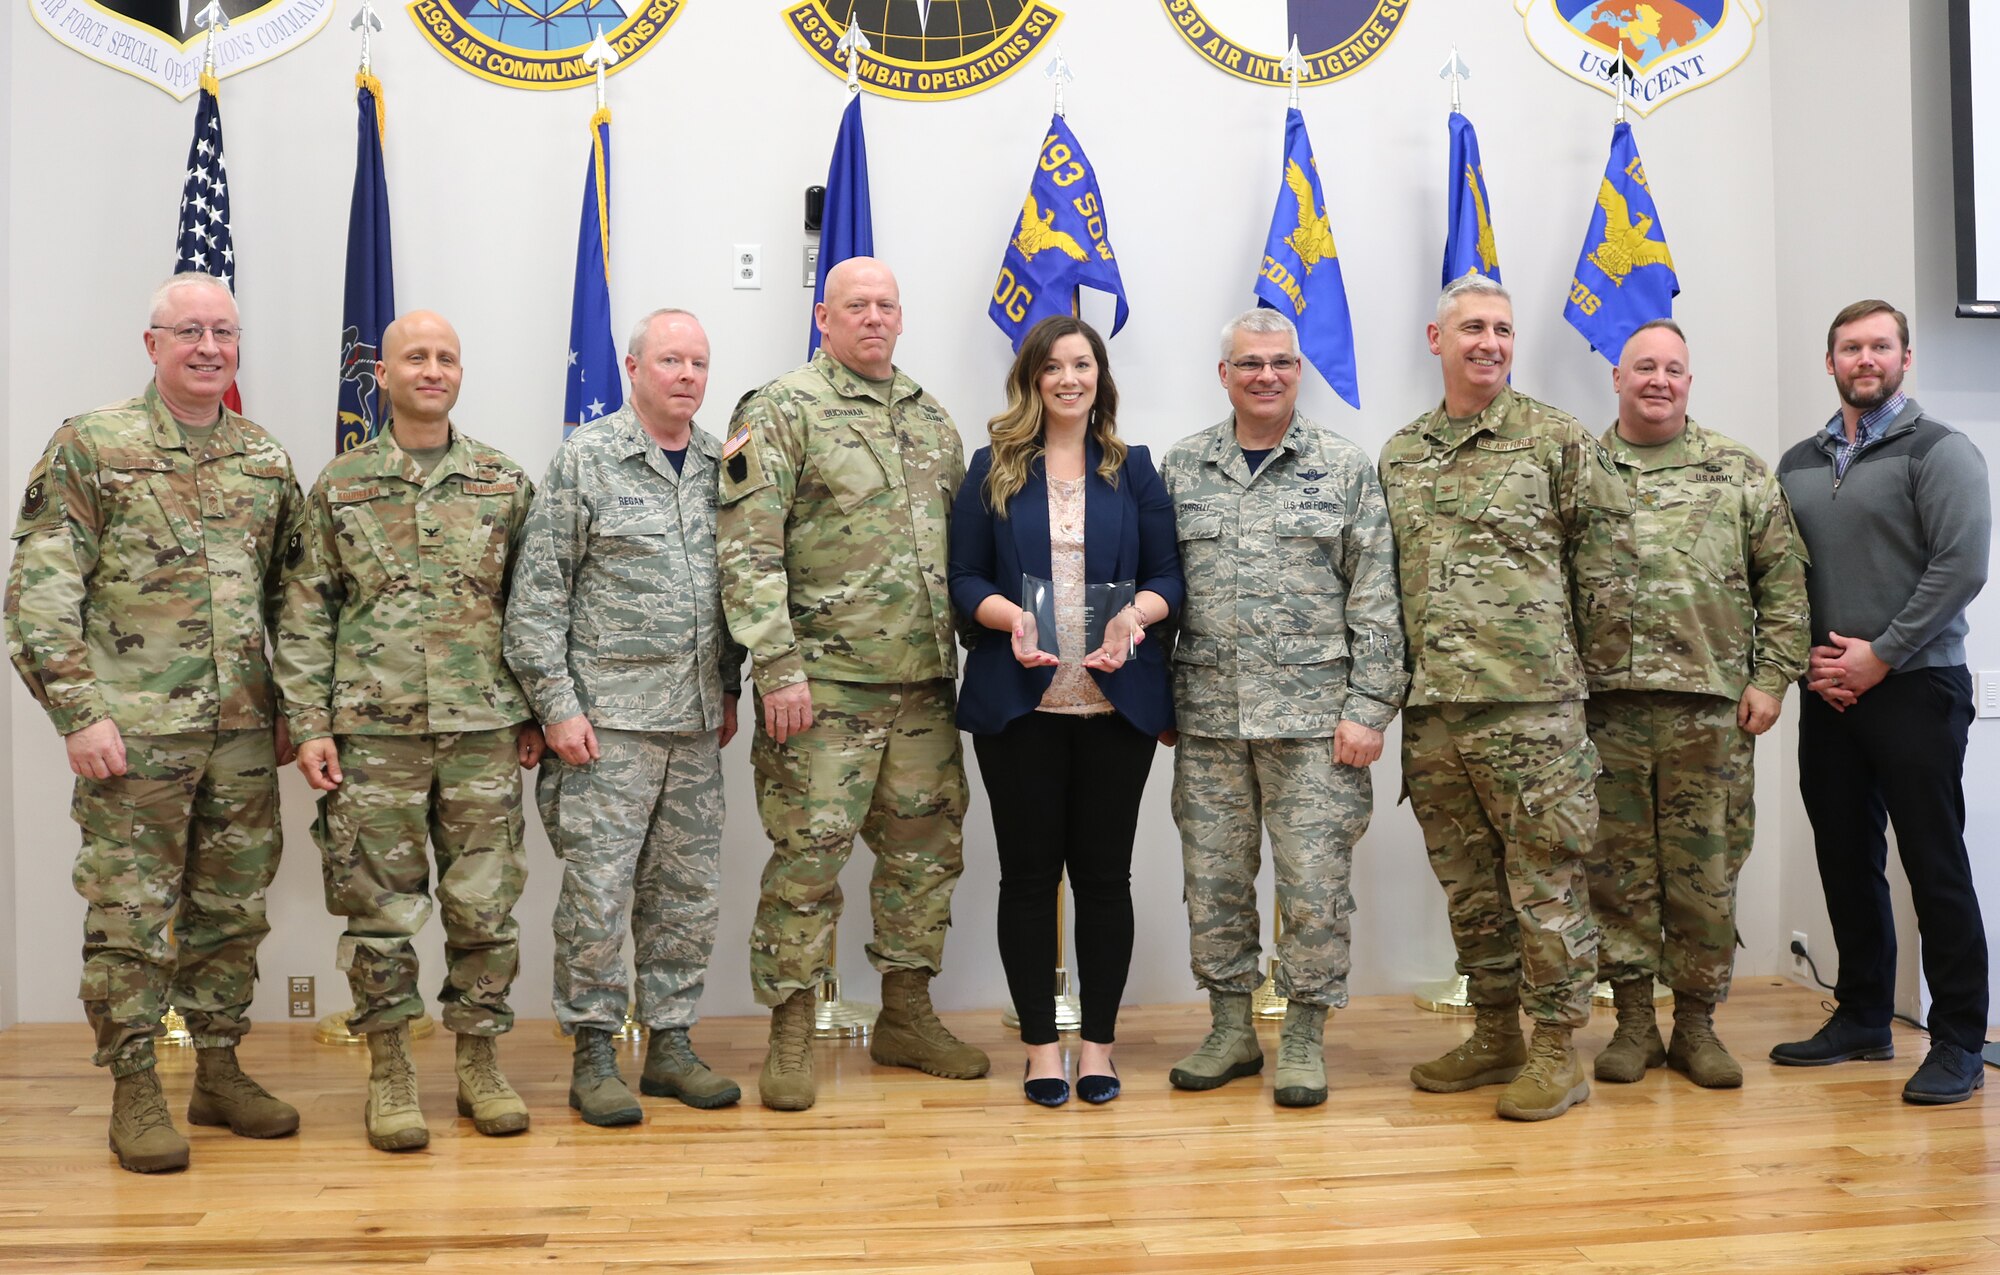 In a ceremony April 6, 2019, Family Readiness volunteer Renee Kotch (center) is named 2018 Region 3 Volunteer of the Year at the 193rd Air Operations Group, State College, Pennsylvania. Maj. Gen. Tony Carrelli (right of Kotch), adjutant general, Pennsylvania National Guard, and other distiguished visitors, attended the event to congratulate Kotch on her efforts to provide support and resources to the families of the AOG. “There is so much pride within this volunteer community. My advice to servicemembers: Don’t assume your spouse doesn’t want to be involved. Let us take the same passion, pride and patriotism we all share in our hearts and allow us - the family members - to serve, too,” Kotch said. (U.S. Air National Guard photo by Tech. Sgt. Denise Mckee)